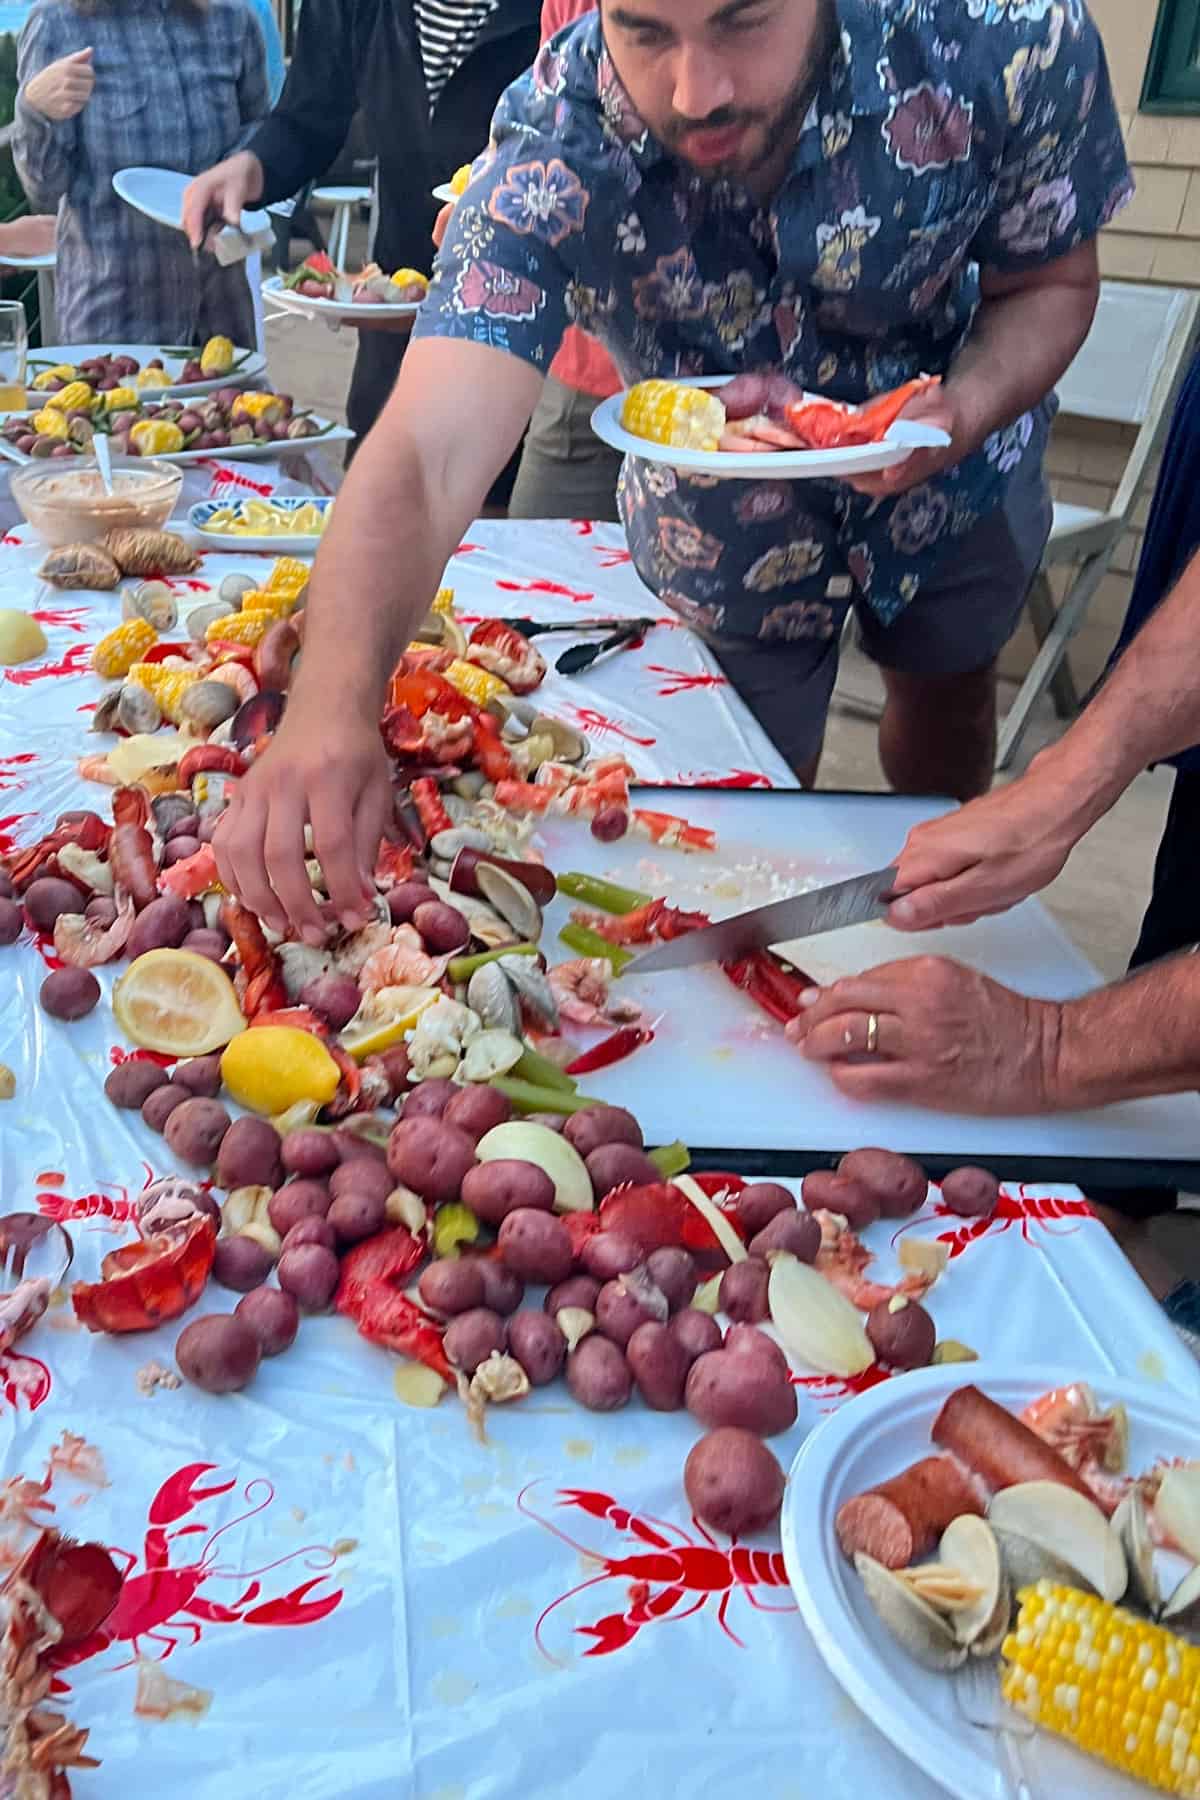 People standing around a table covered with seafood, corn and potatoes, reaching out to grab stuff to put on their paper plates.